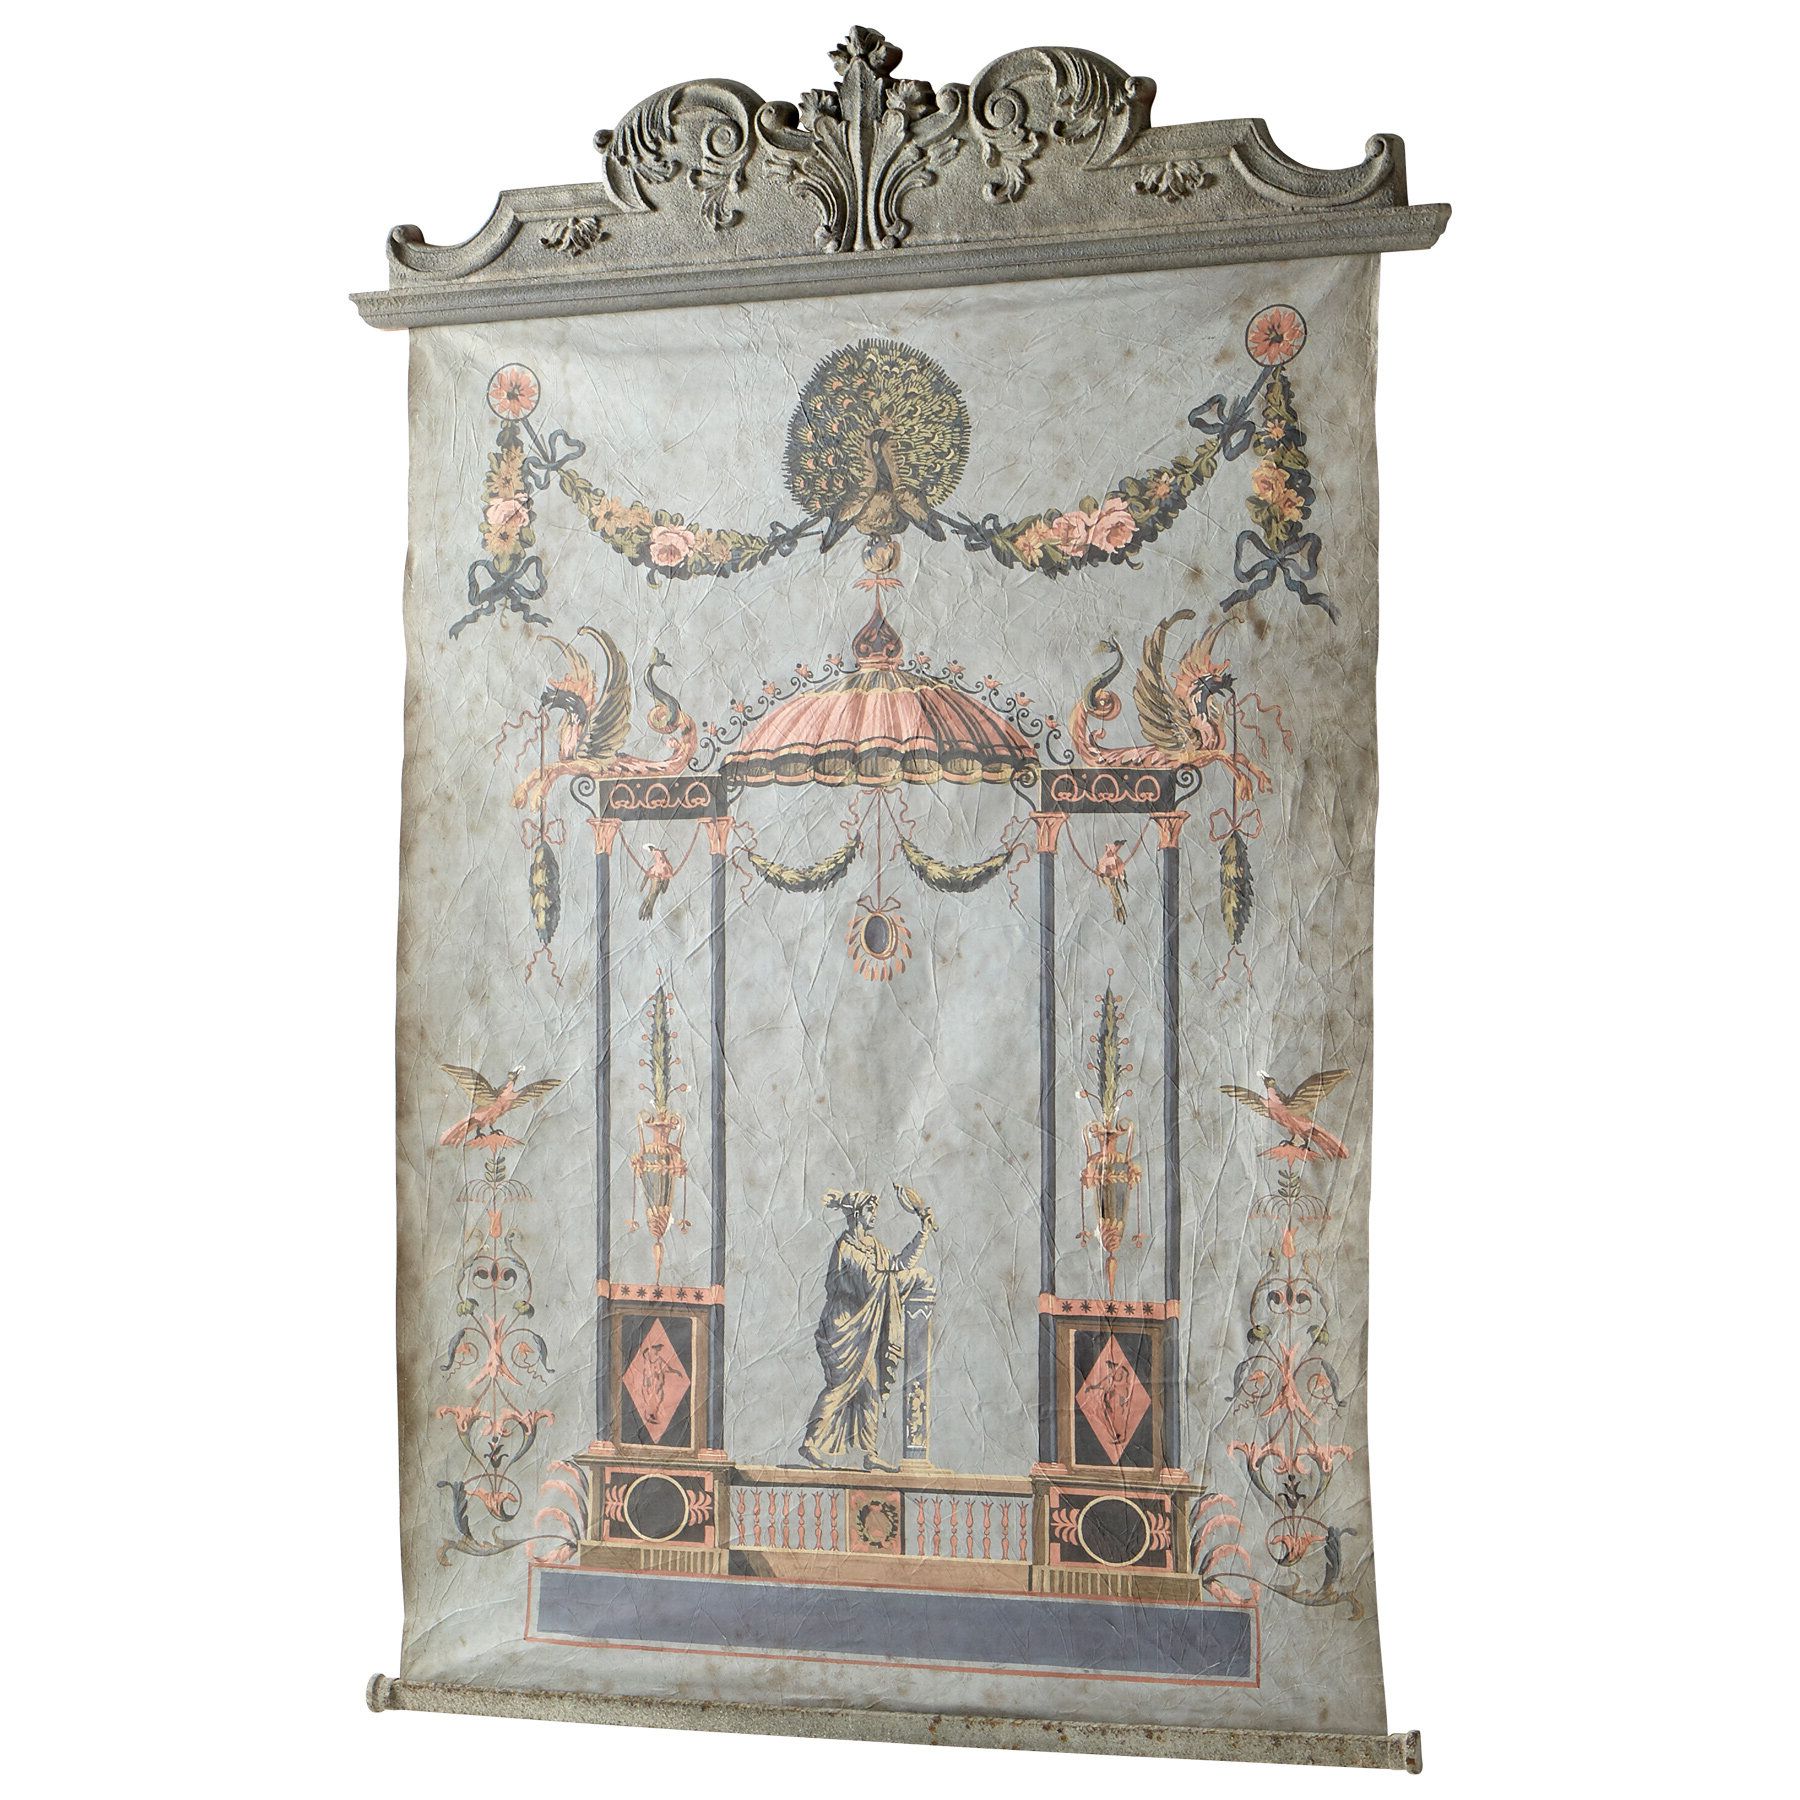 Popular Blended Fabric Wall Hangings With Rod Included Intended For Blended Fabric Ethereal Days Chinoiserie Wall Hanging With Rod (View 6 of 20)